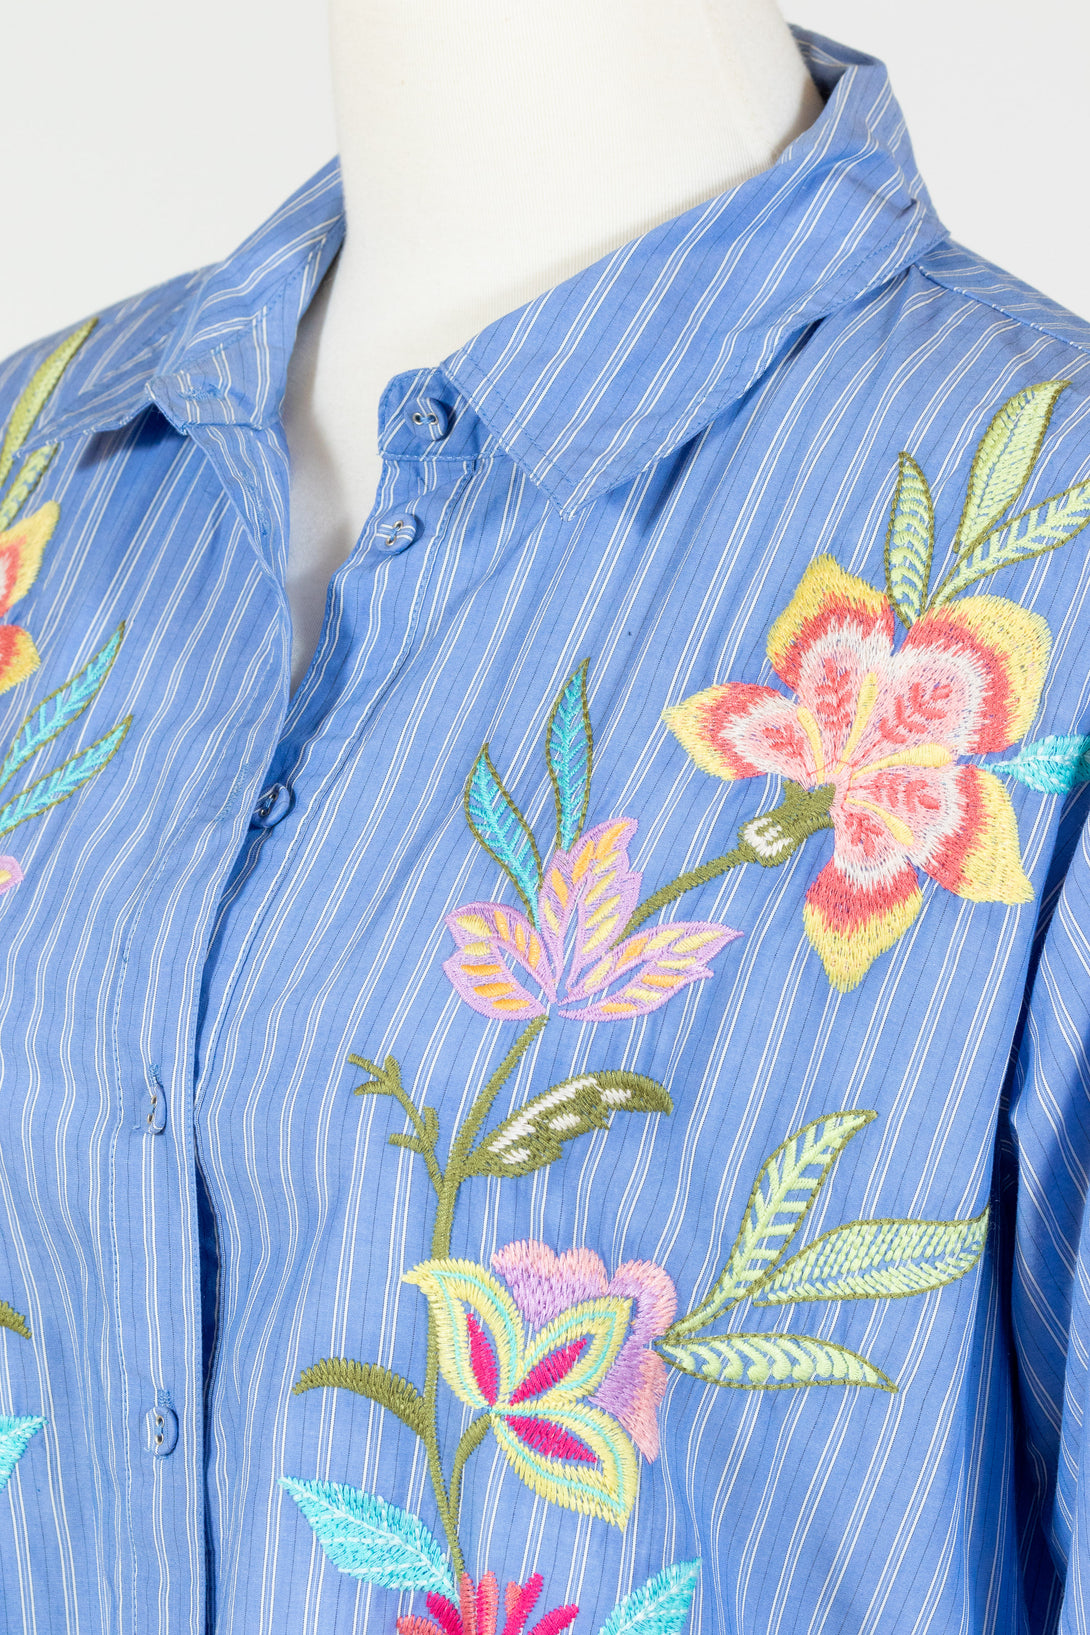 JohnnyWas-Camellia-Tunic-Dress-Striped-Blue-Embroidered